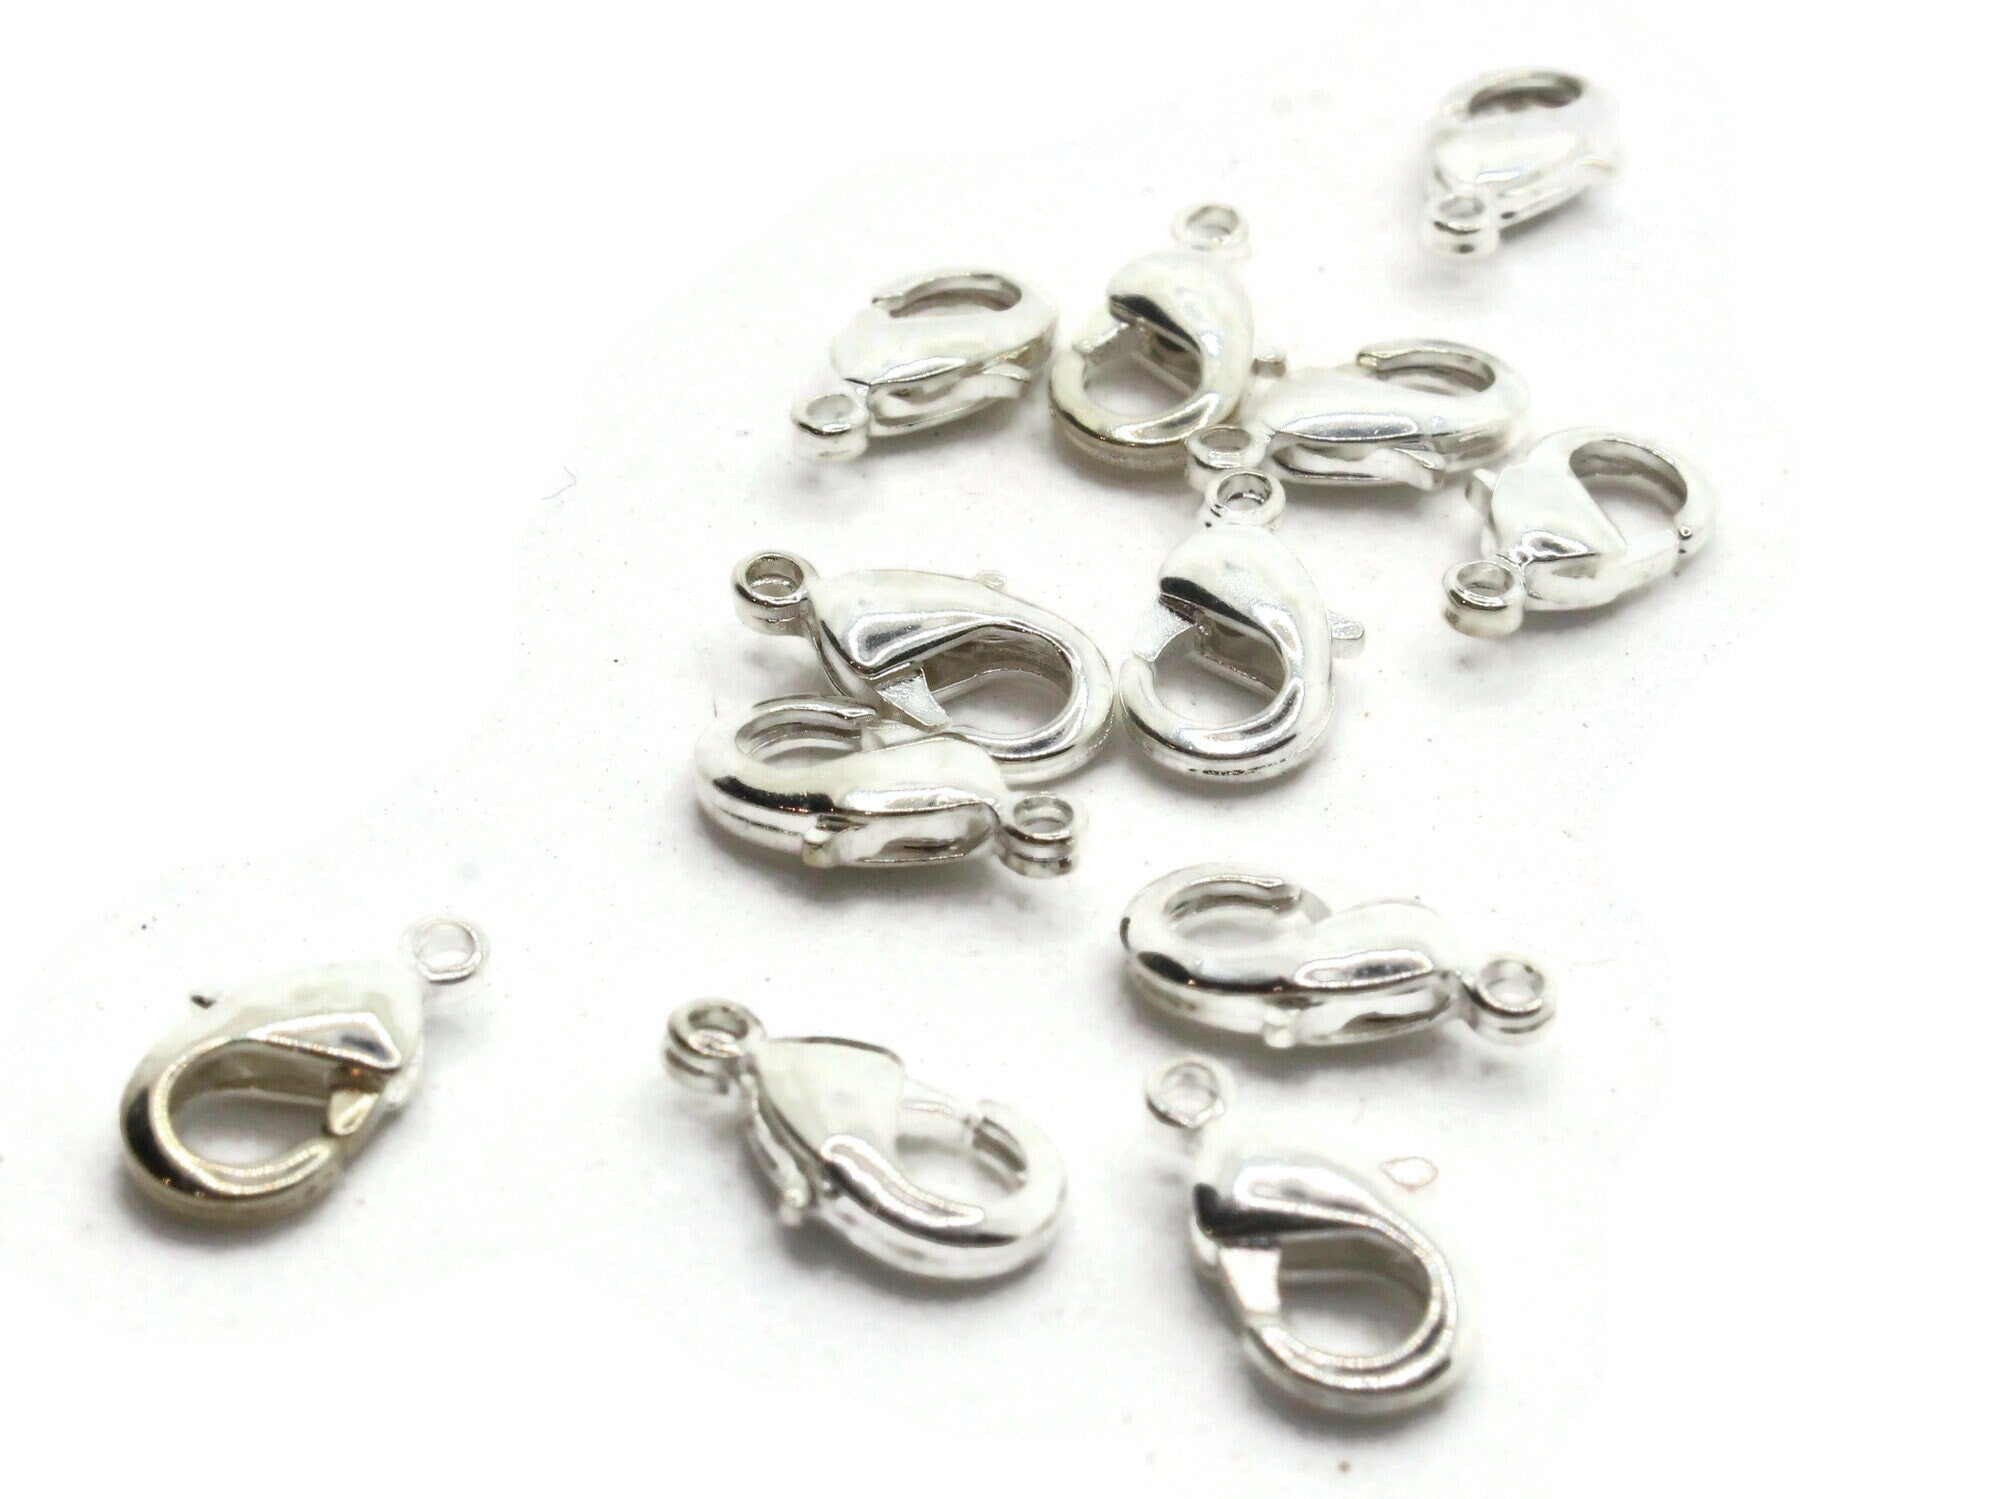 12mm silver clasp swivel clasp jewelry making supply lobster claw clasp